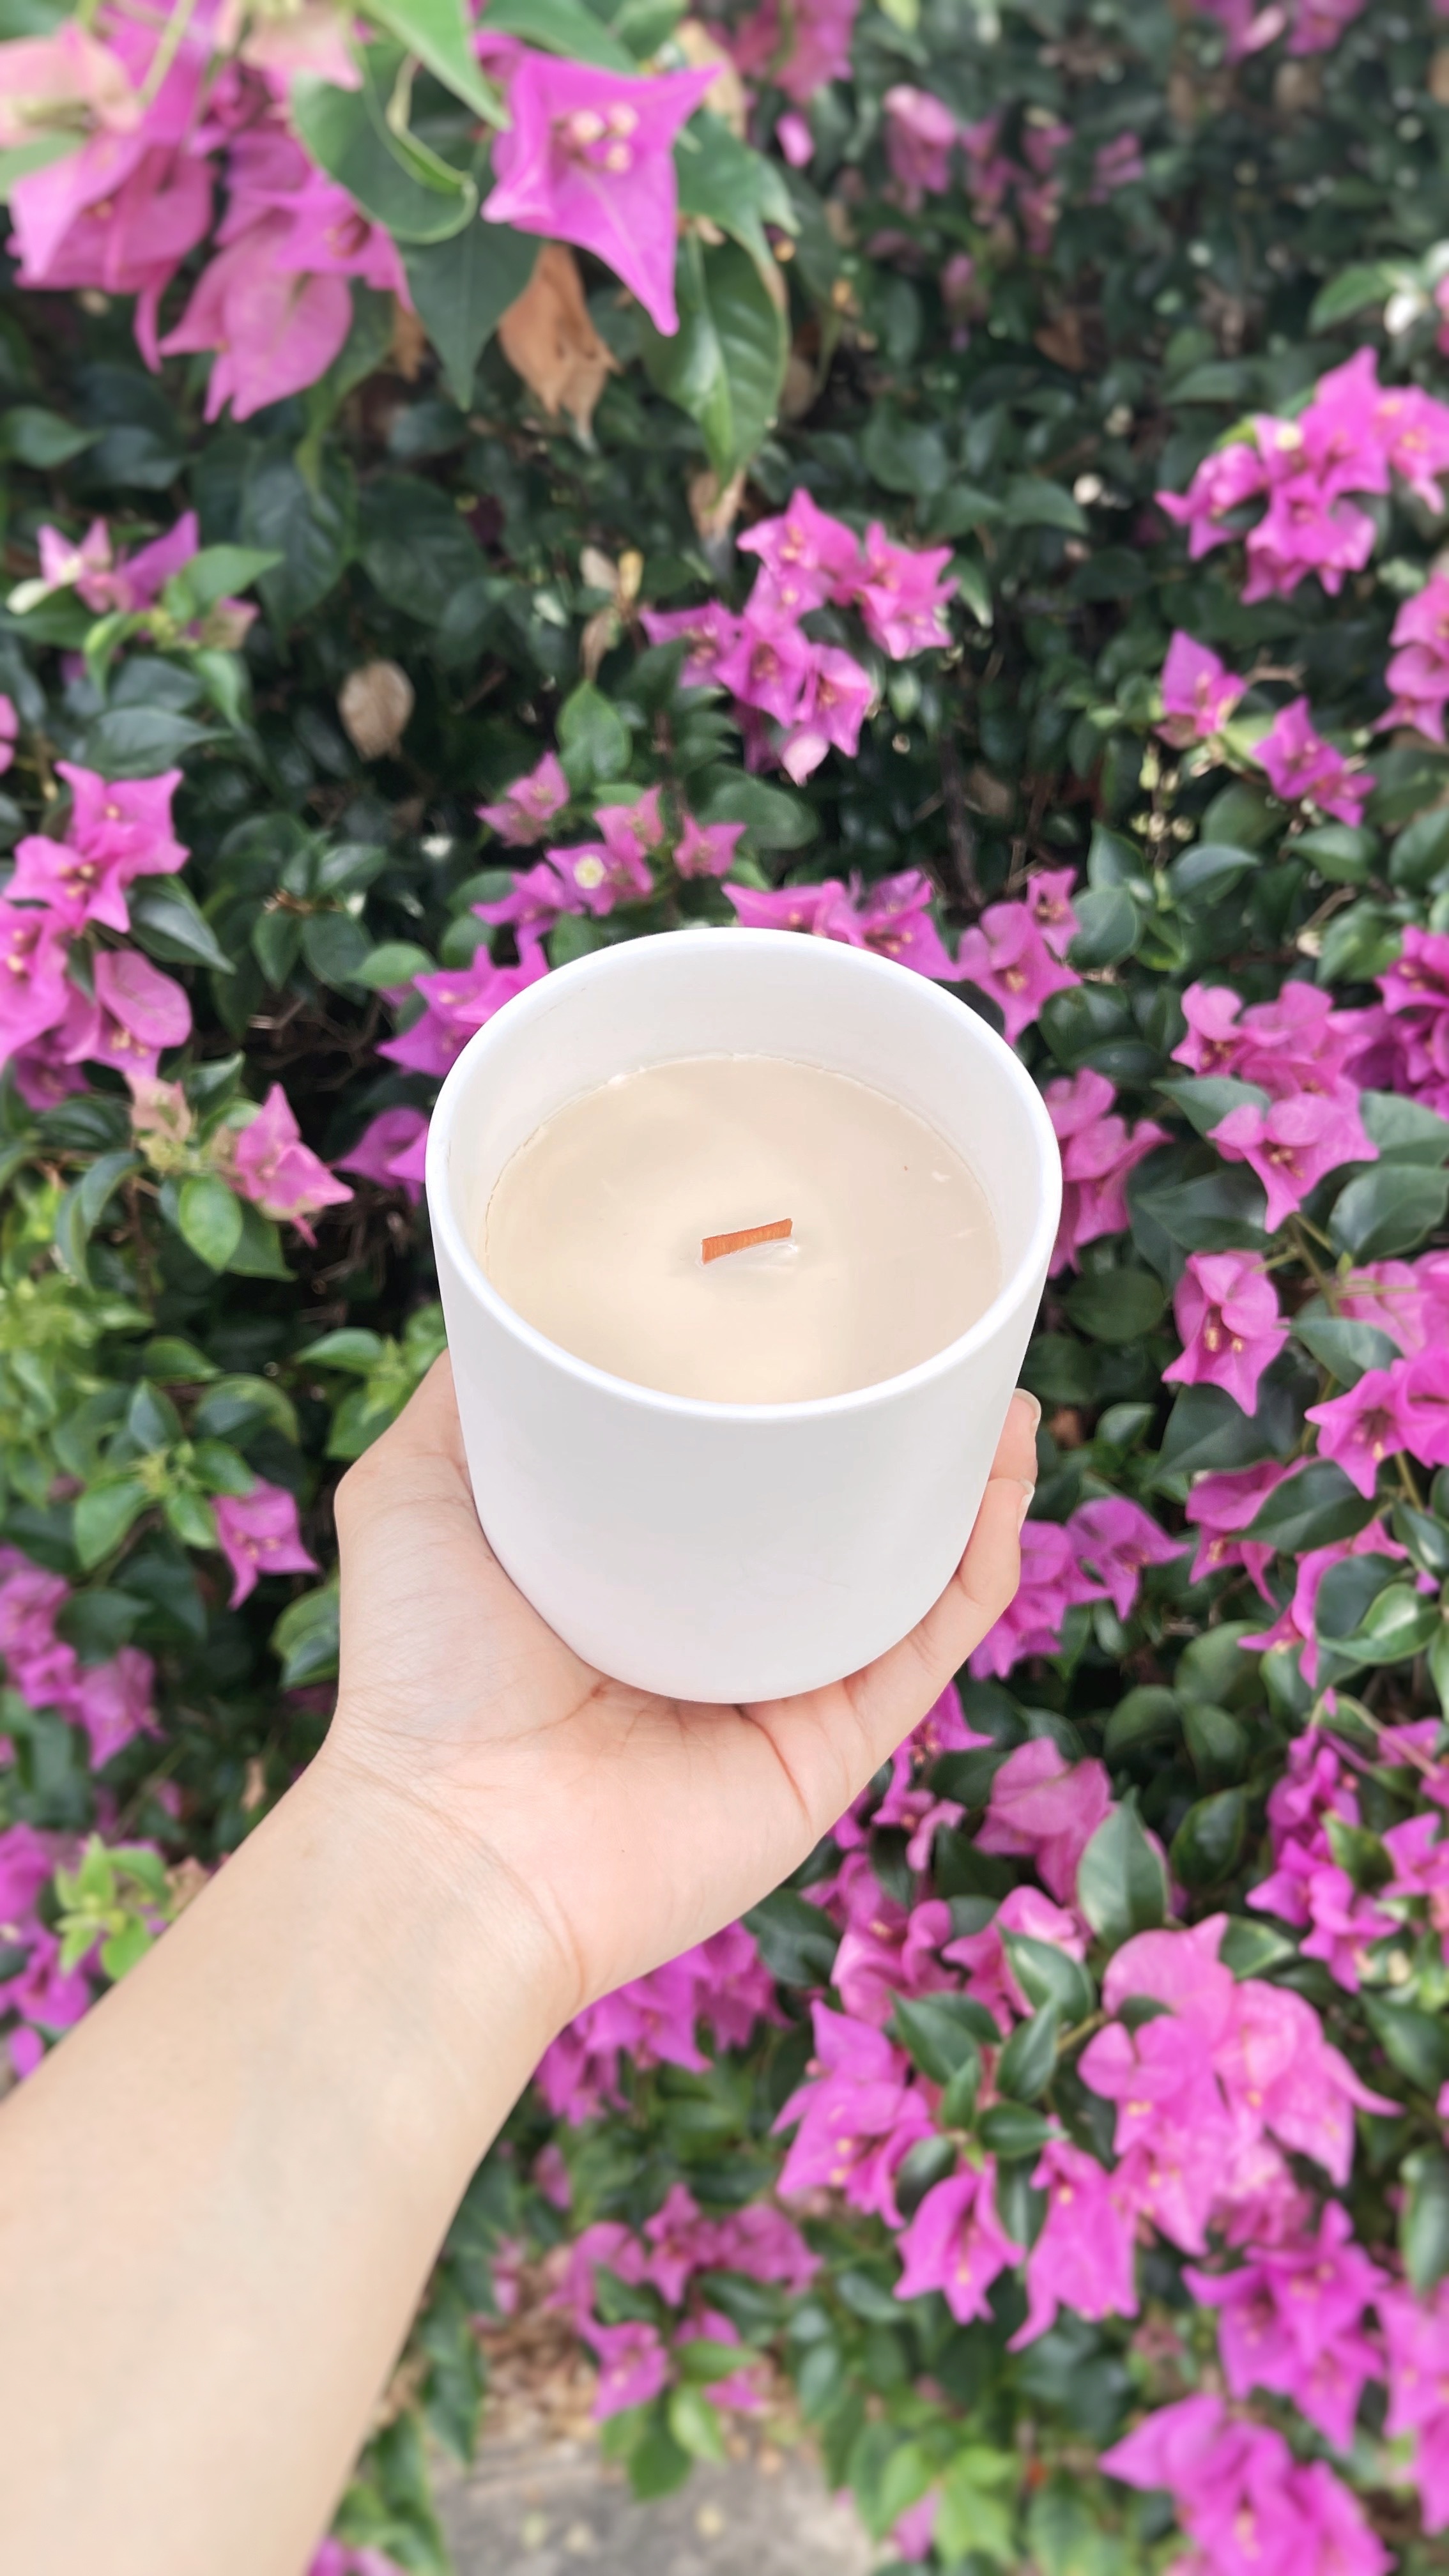 L'Air Du Jardin Scented Candles Senior Fragrance Candle 220g Lle Blanche  Ceramics Jar Aromatherapy Candle Home Decoration Gifts